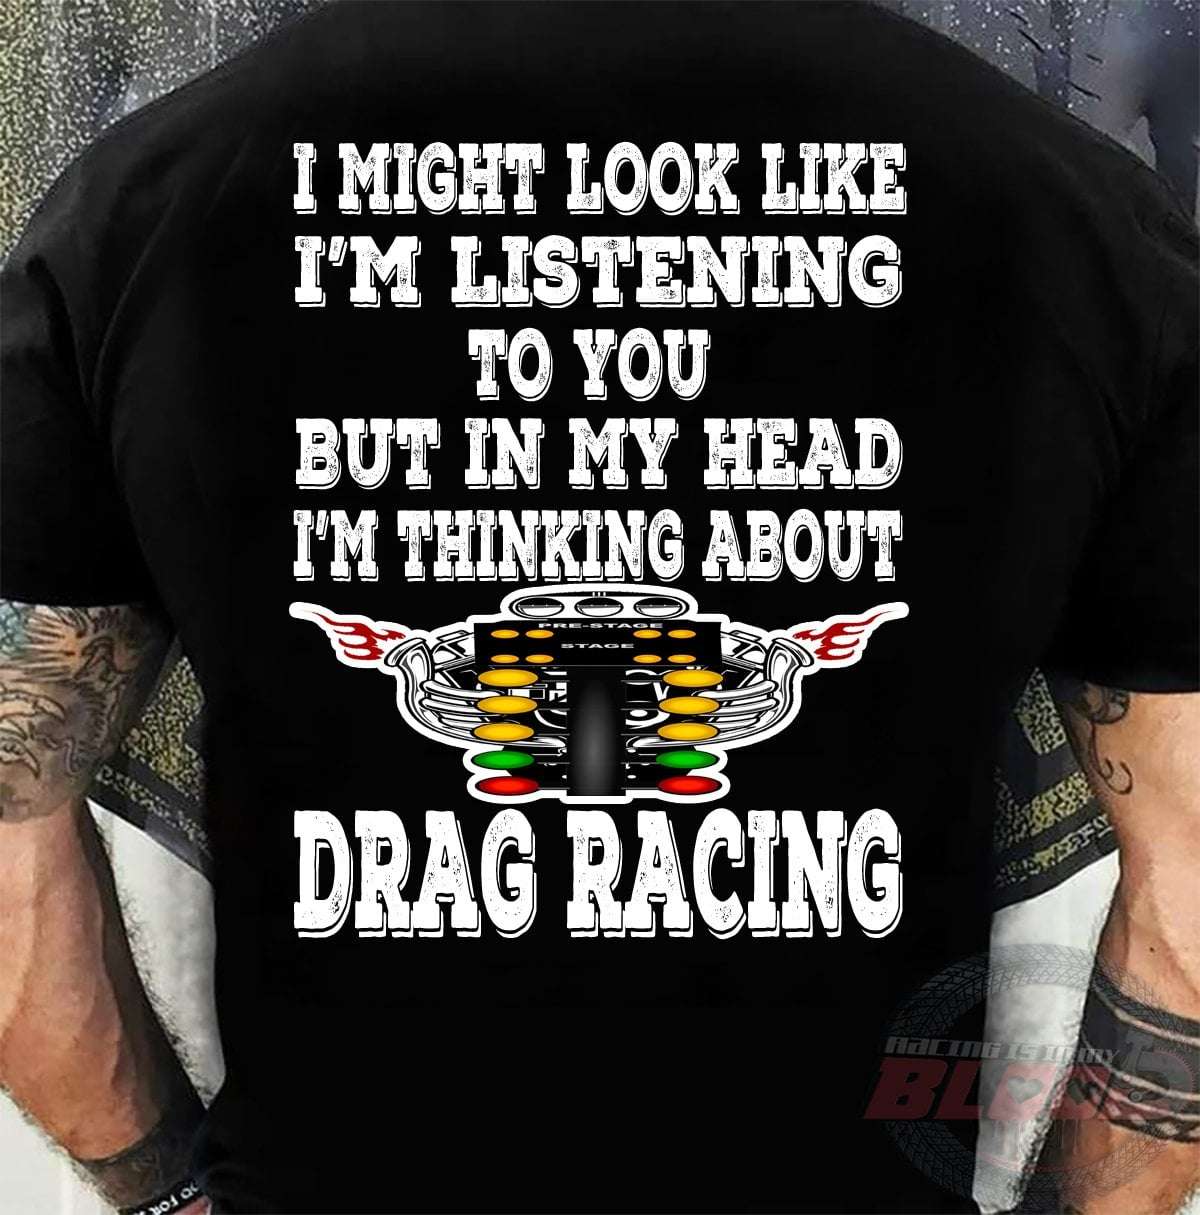 I might look like I'm listening to you but in my head I'm thinking about Drag racing